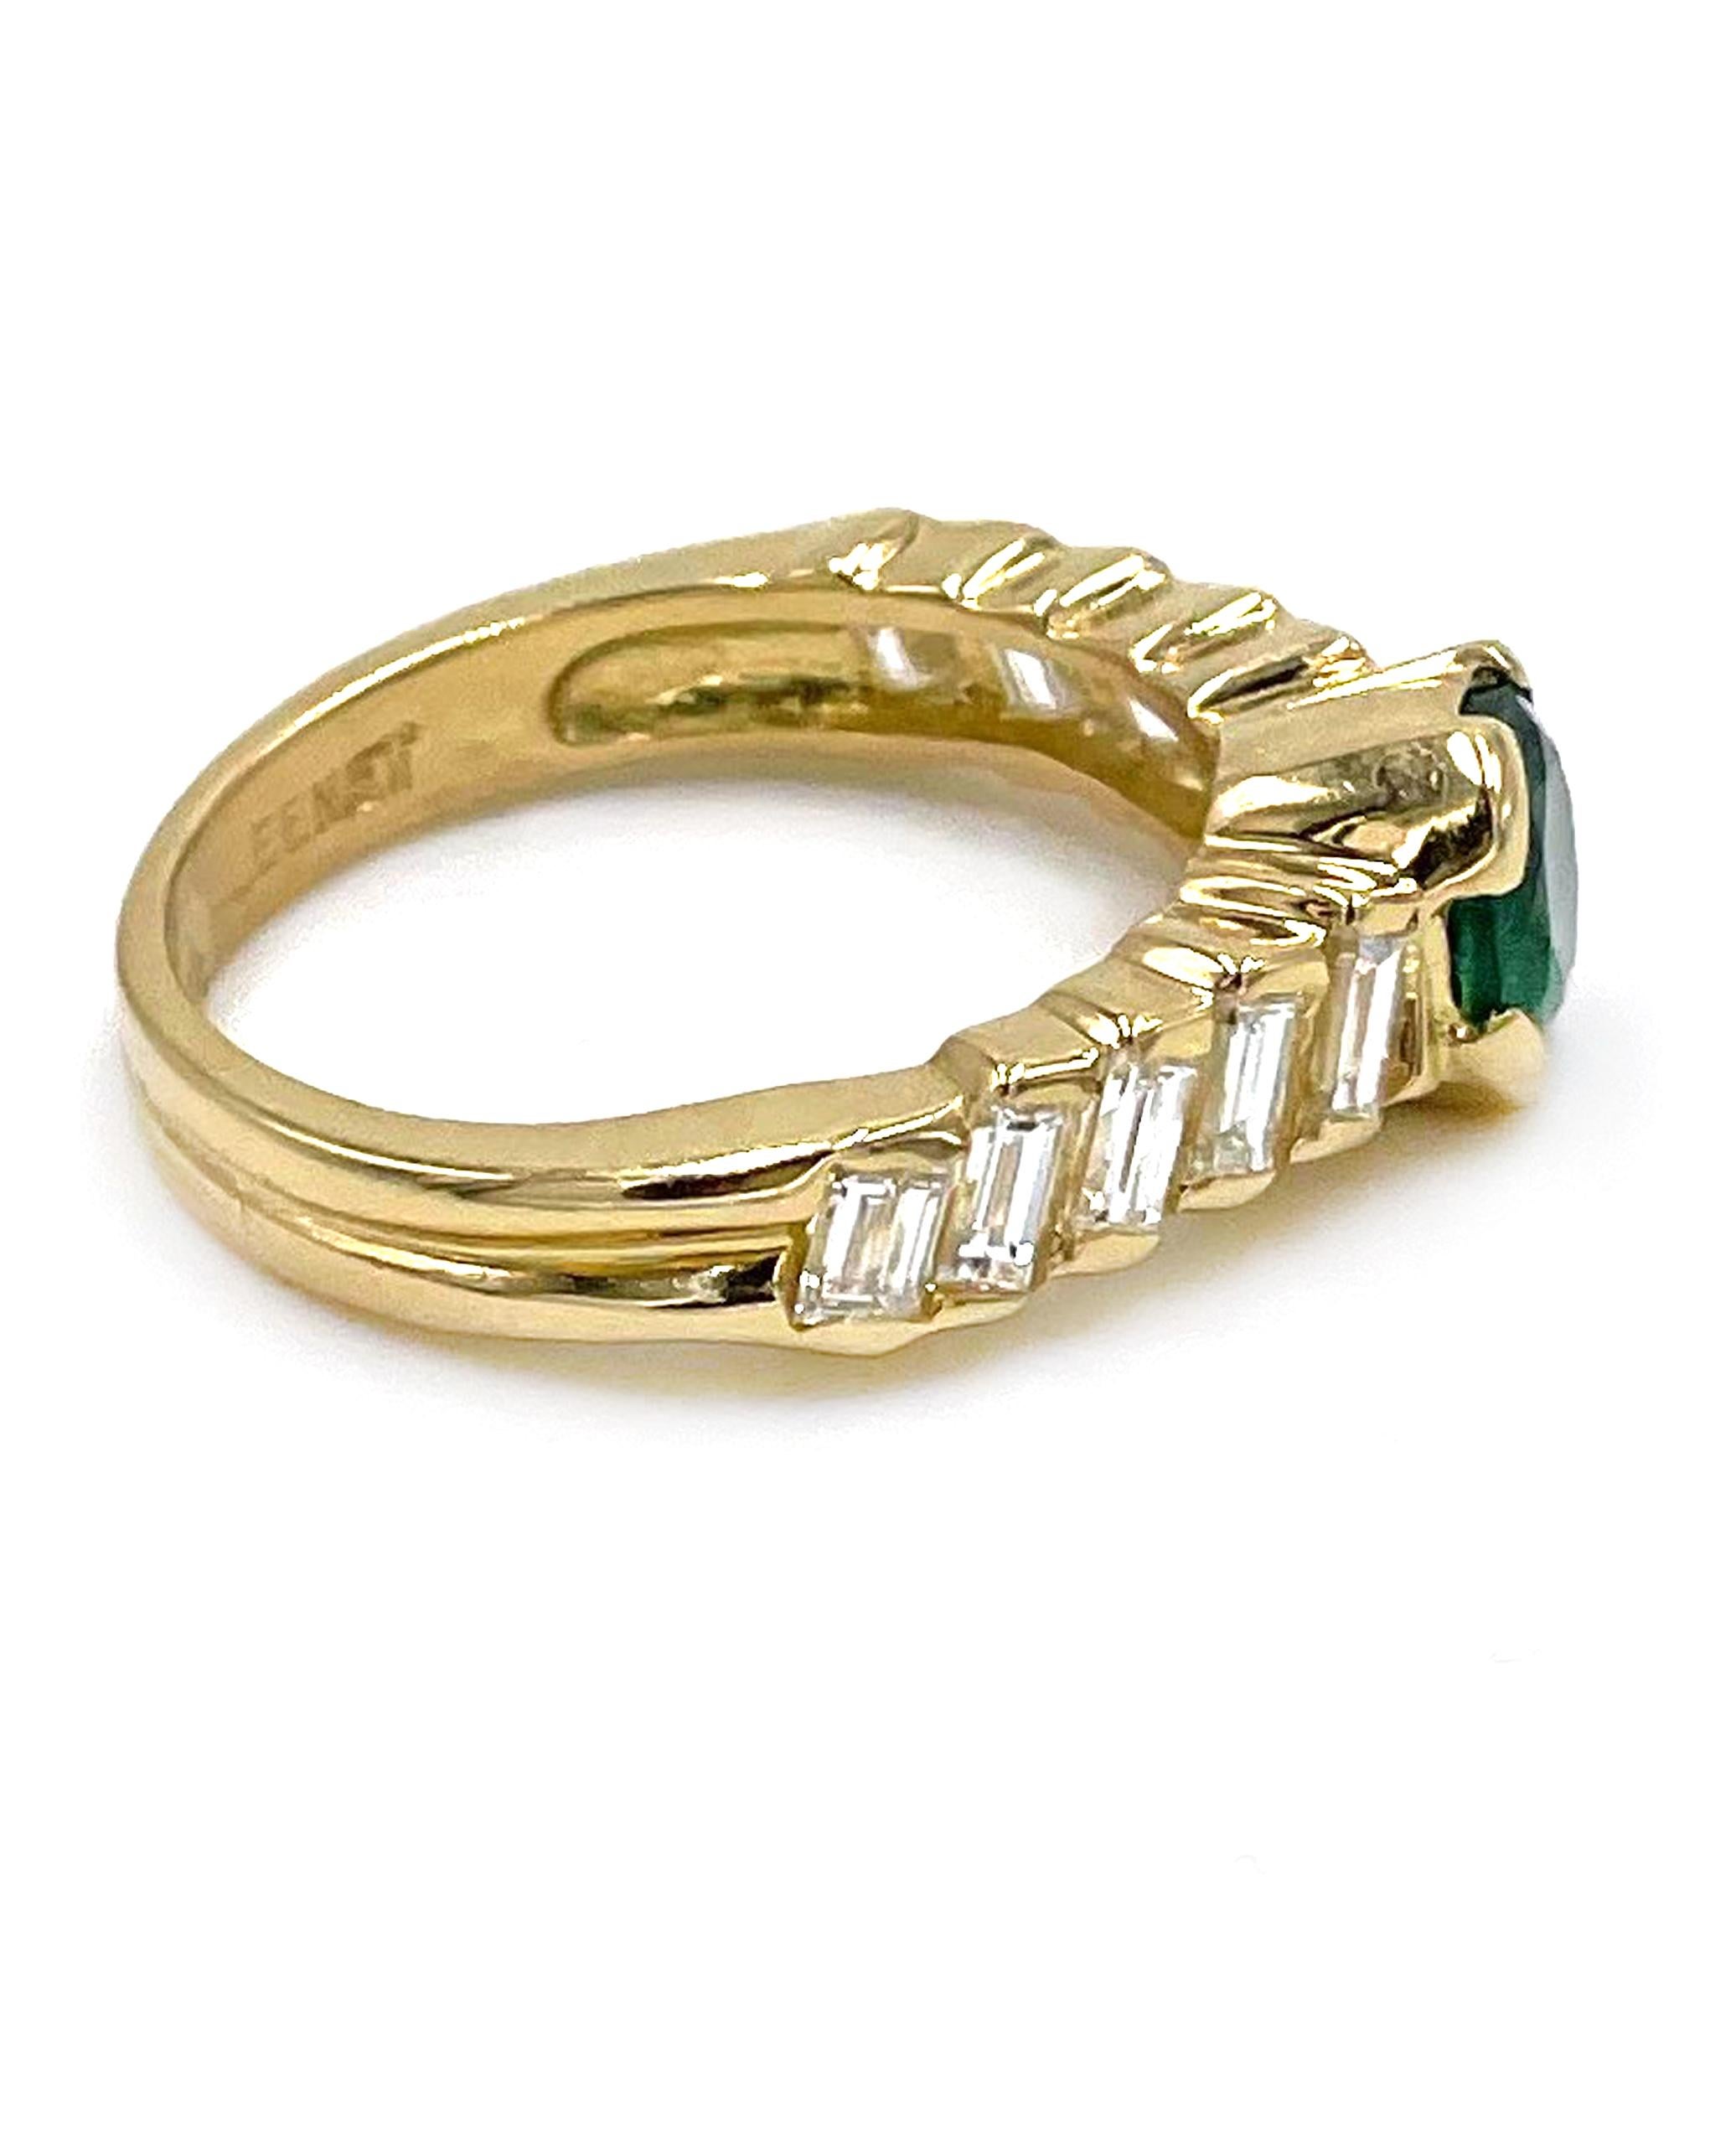 Preowned 18K yellow gold ring with 10 straight baguette diamonds weighing 1.20 carats total: G color, VS clarity. Center is set with one round faceted emerald weighing 1.01 carats.

*Finger size 6
